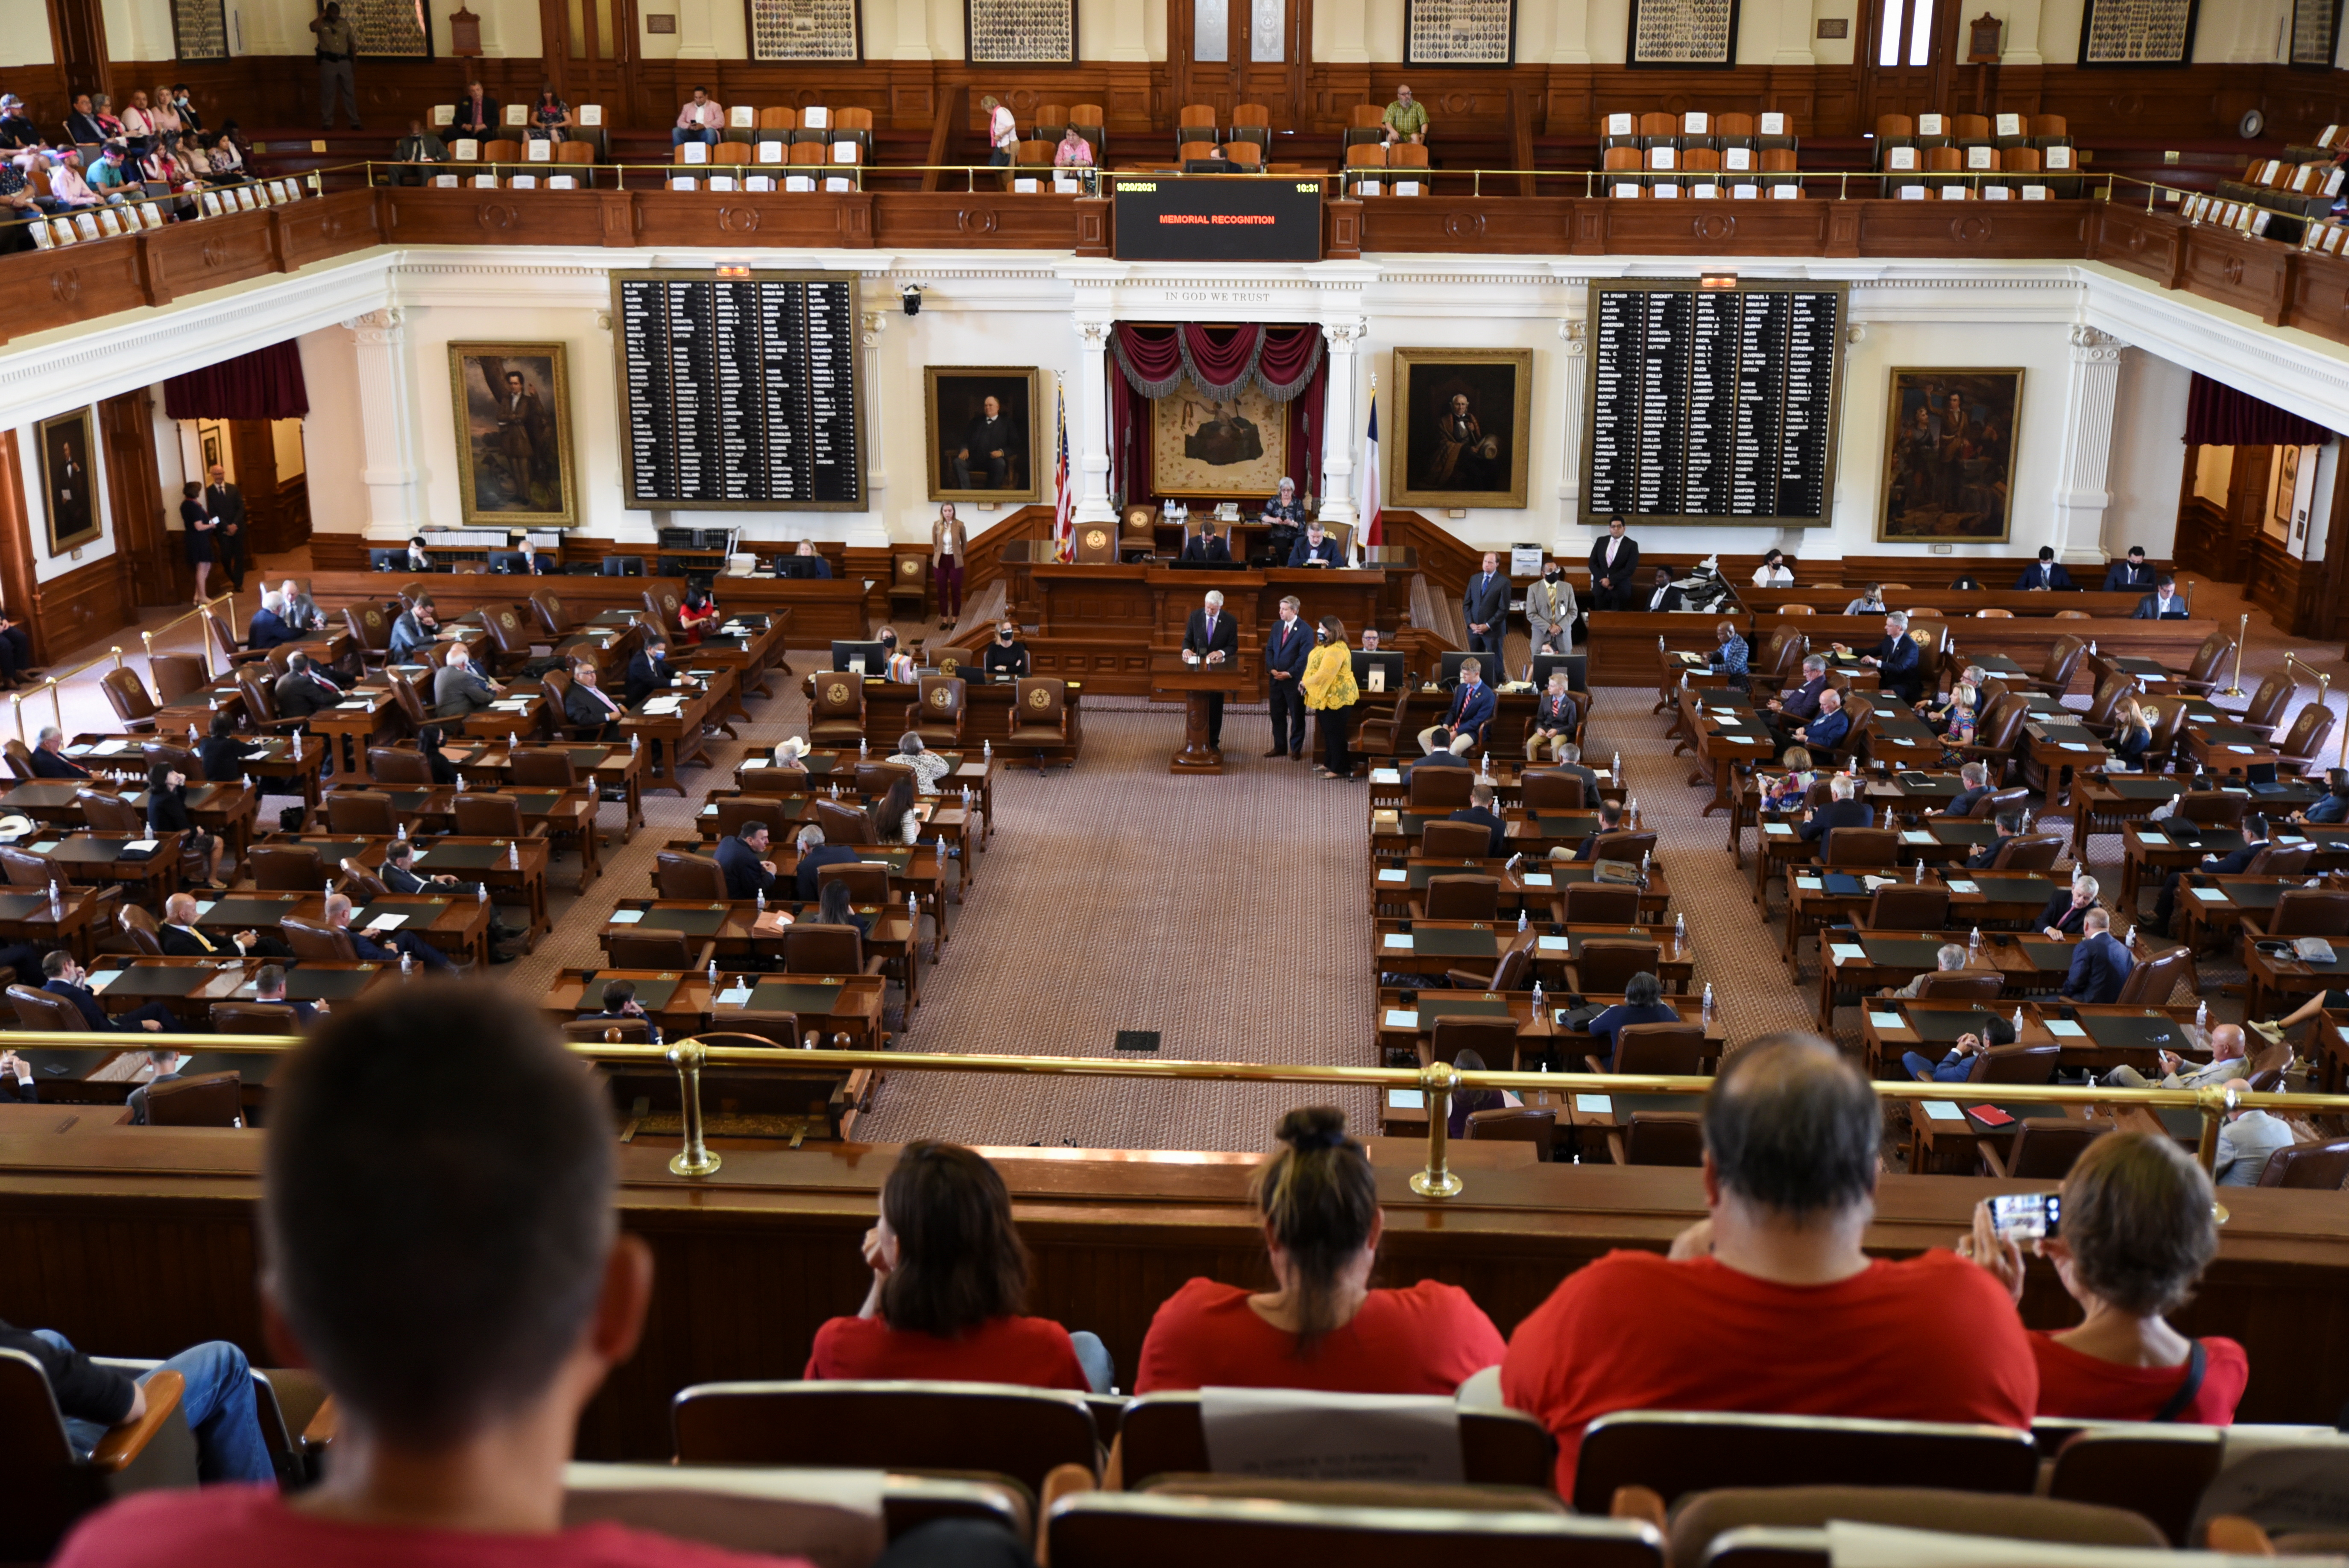 Attendees look on as the Texas House of Representatives convenes a third special legislative session for controversial legislative items at the State Capitol in Austin, Texas, U.S. September 20, 2021.  REUTERS/Sergio Flores